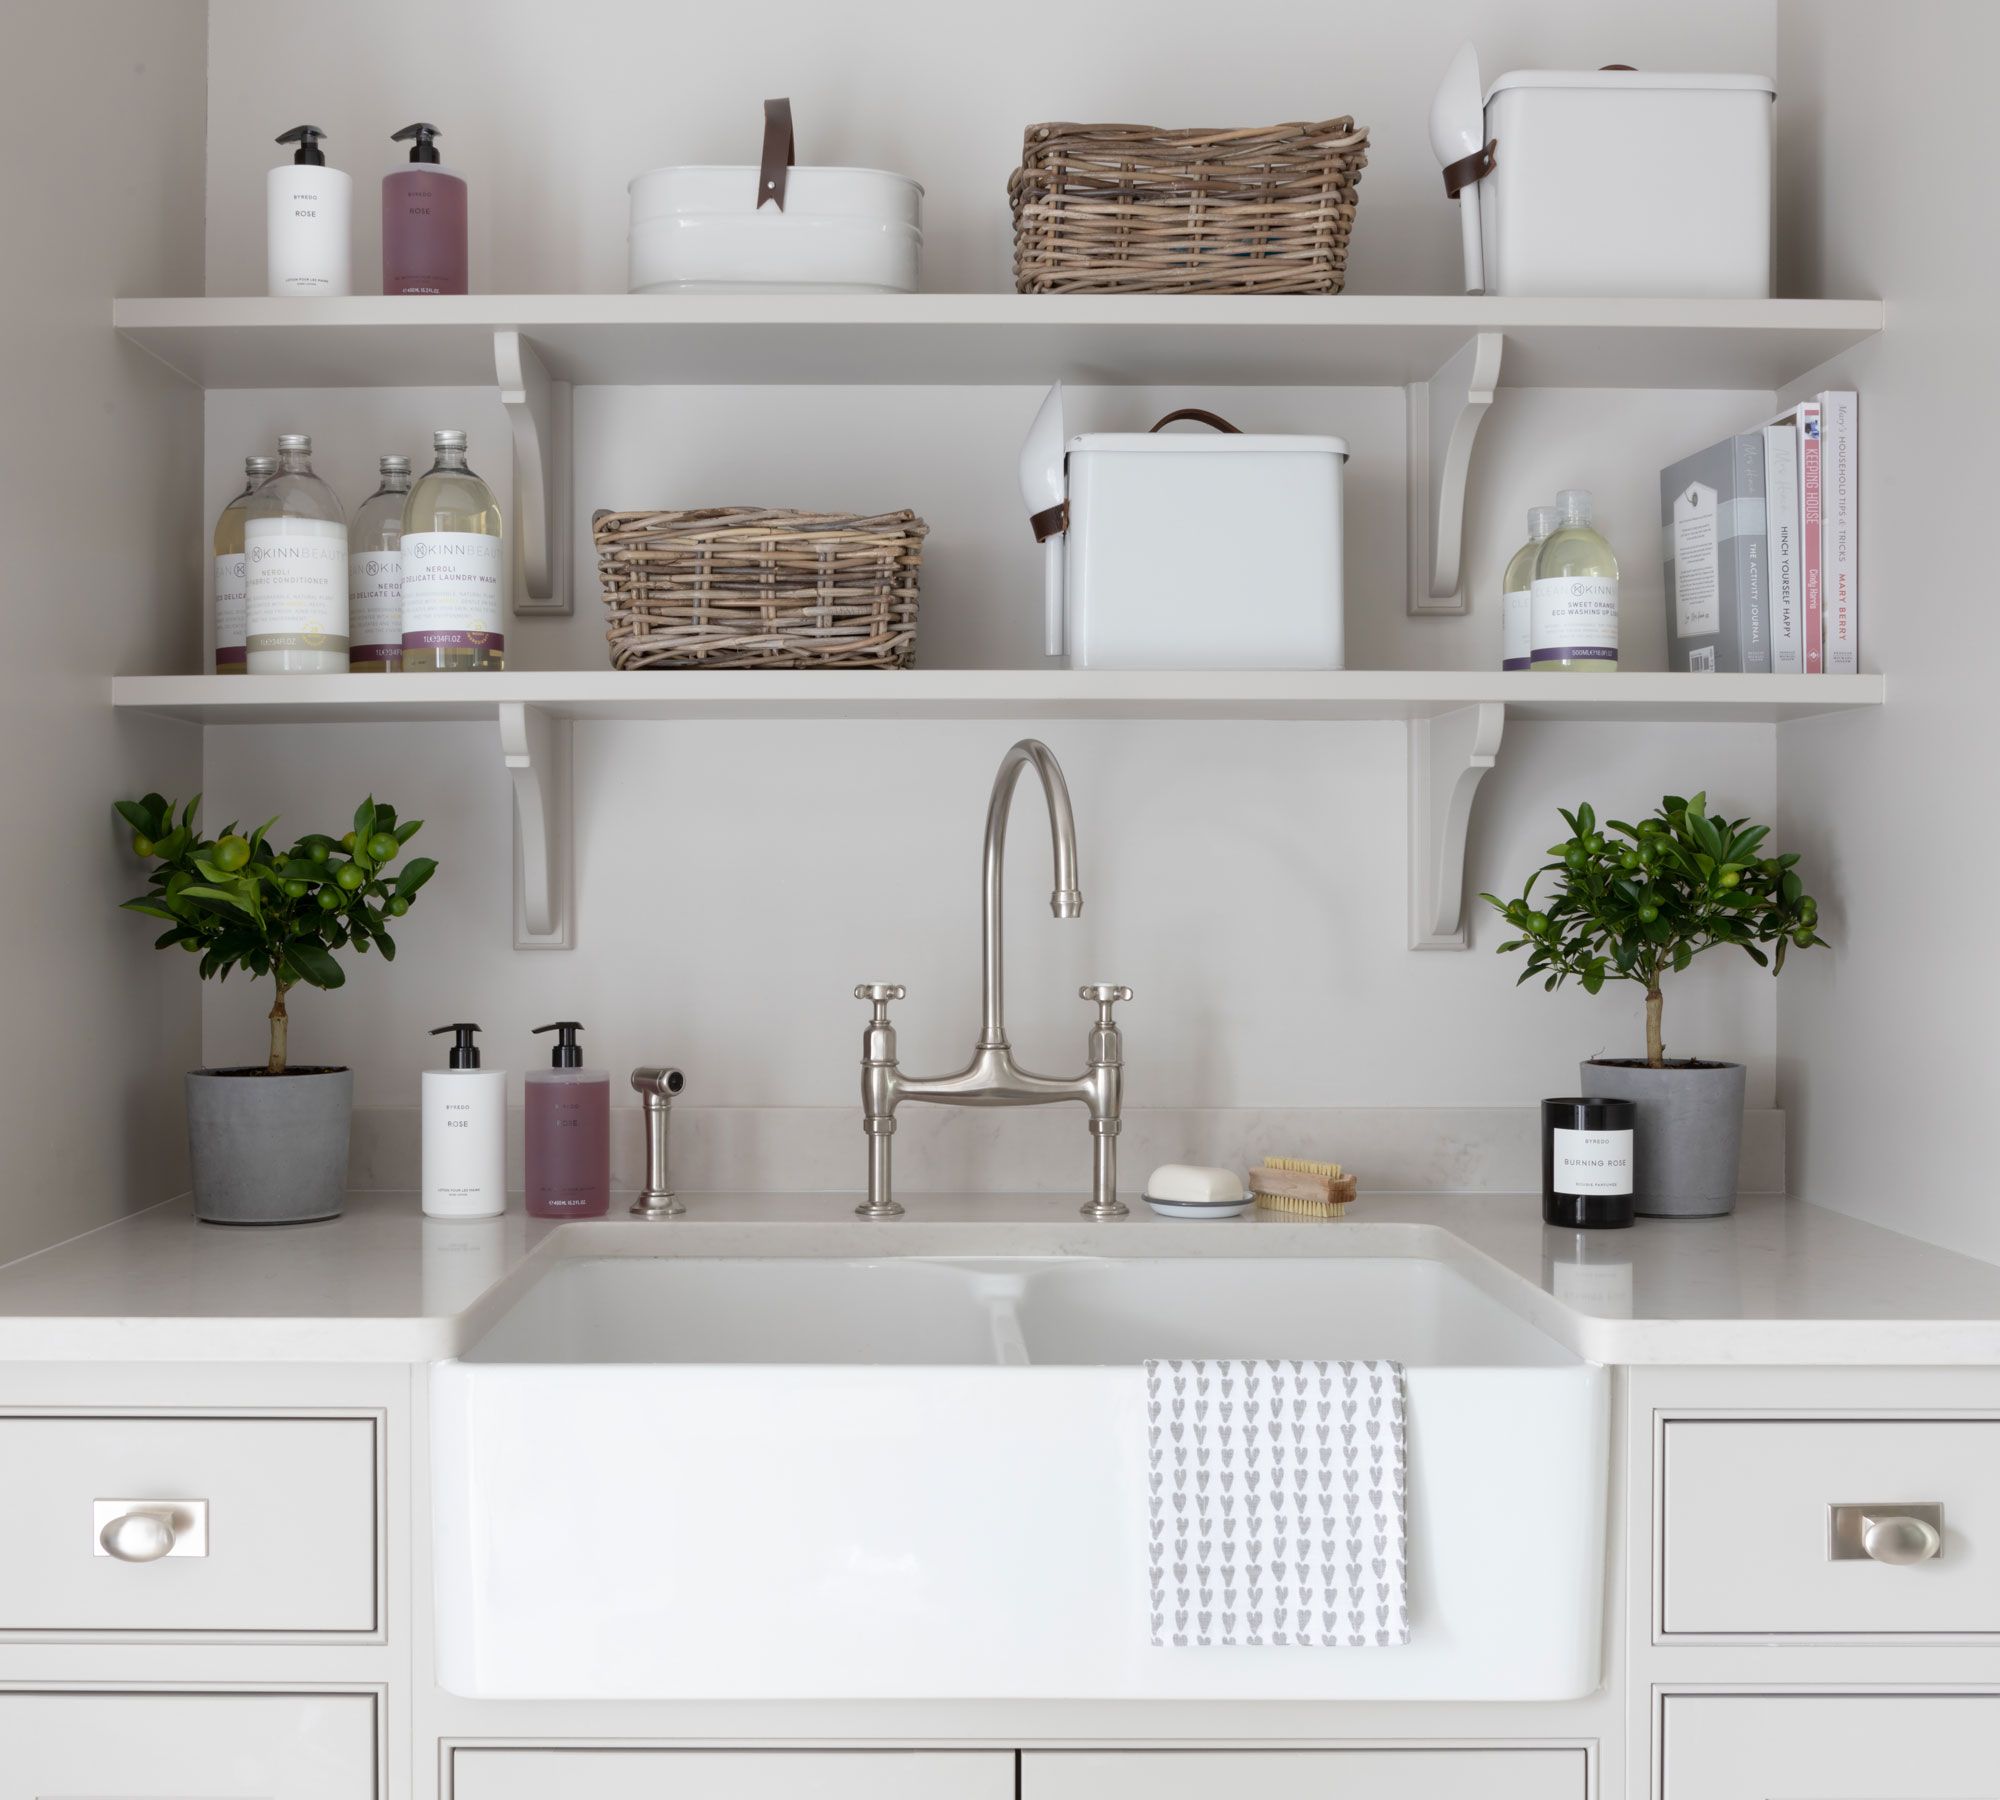 A white Belfast sink in a laundry room by KINN laundry collection, available at Humphrey Mason